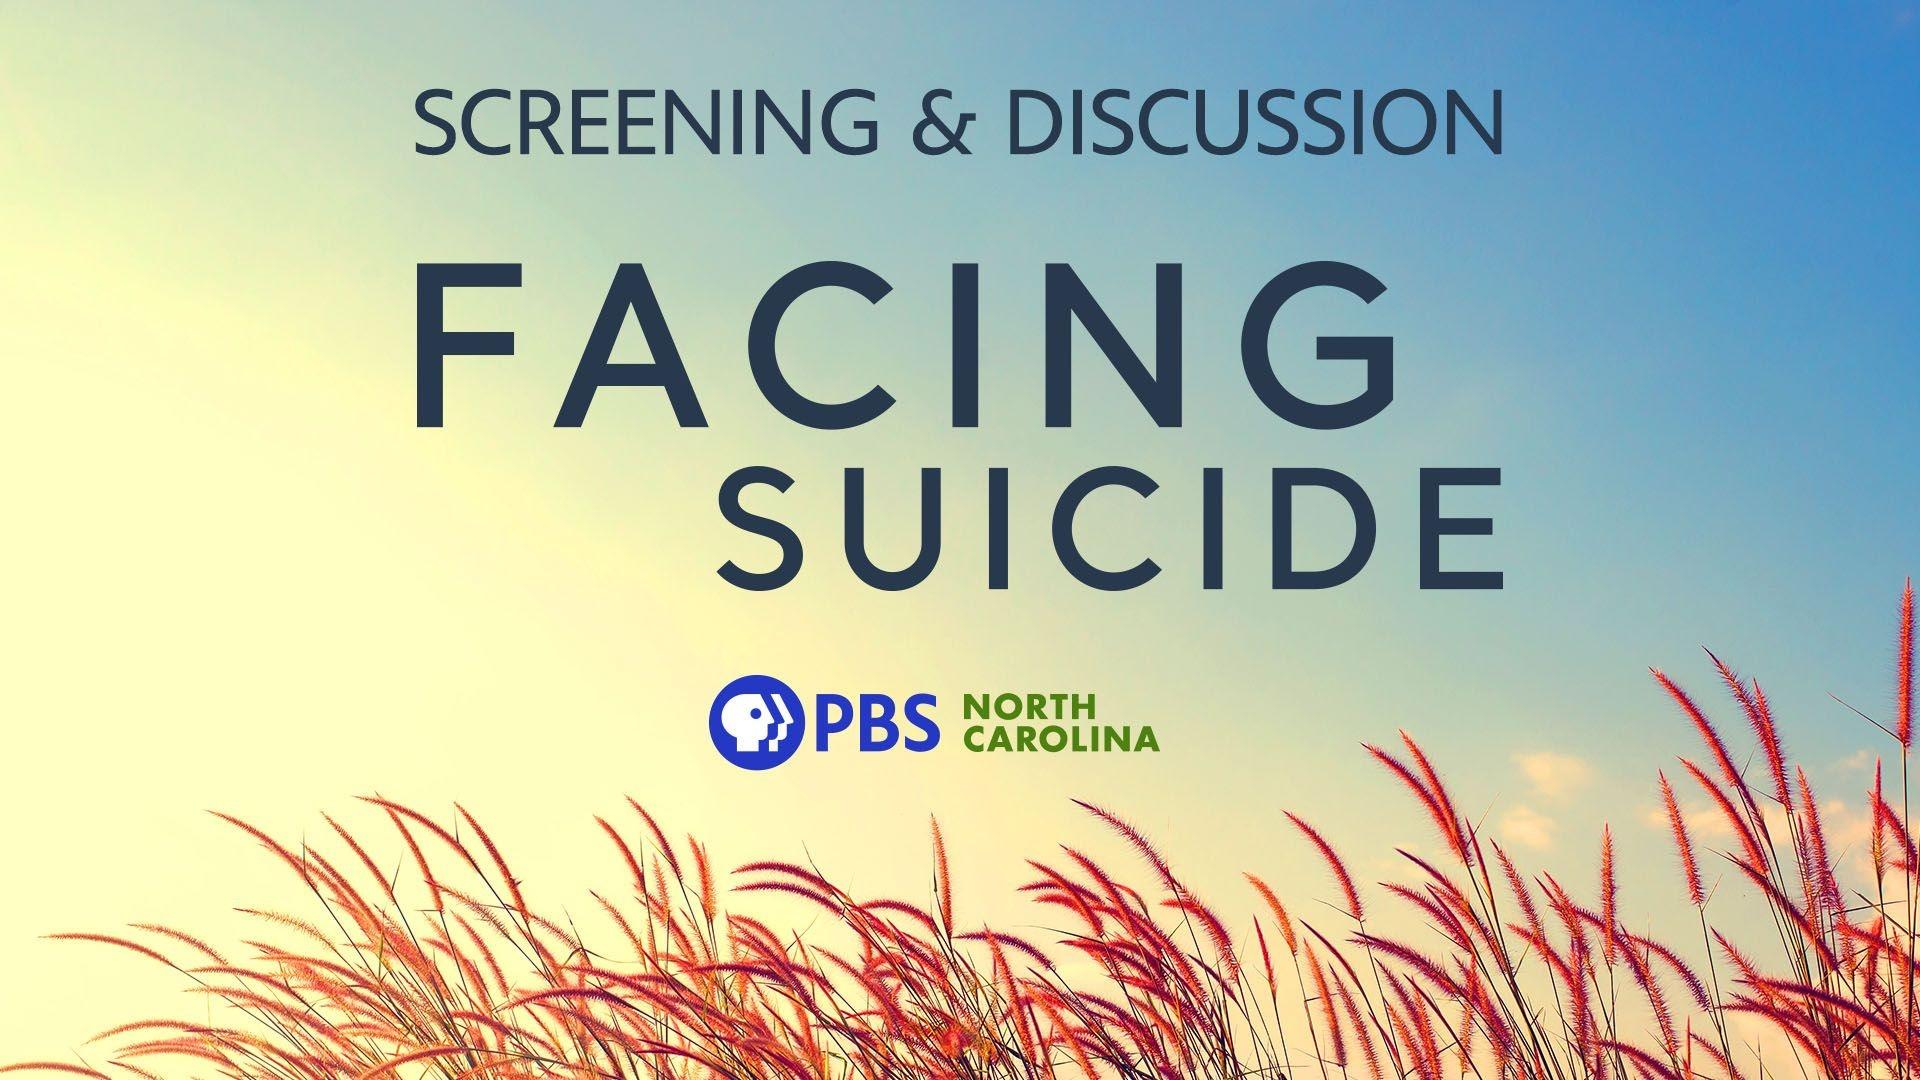 wheat field with a blue sky background and the text "Facing Suicide Screening and Discussion"